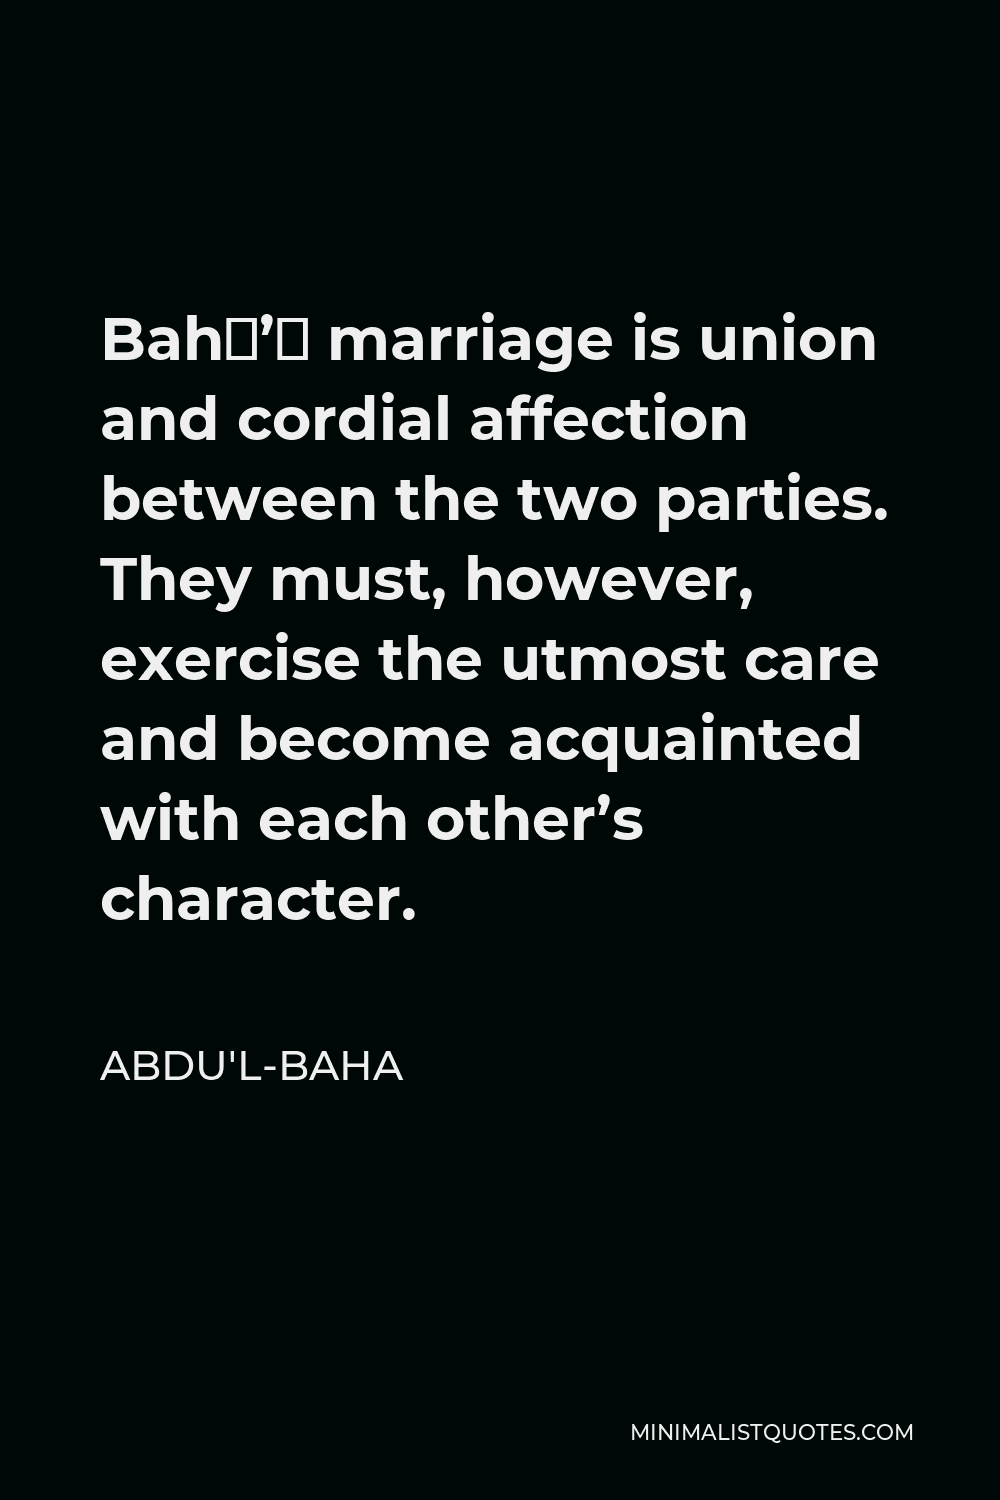 Abdu'l-Baha Quote - Bahá’í marriage is union and cordial affection between the two parties. They must, however, exercise the utmost care and become acquainted with each other’s character.